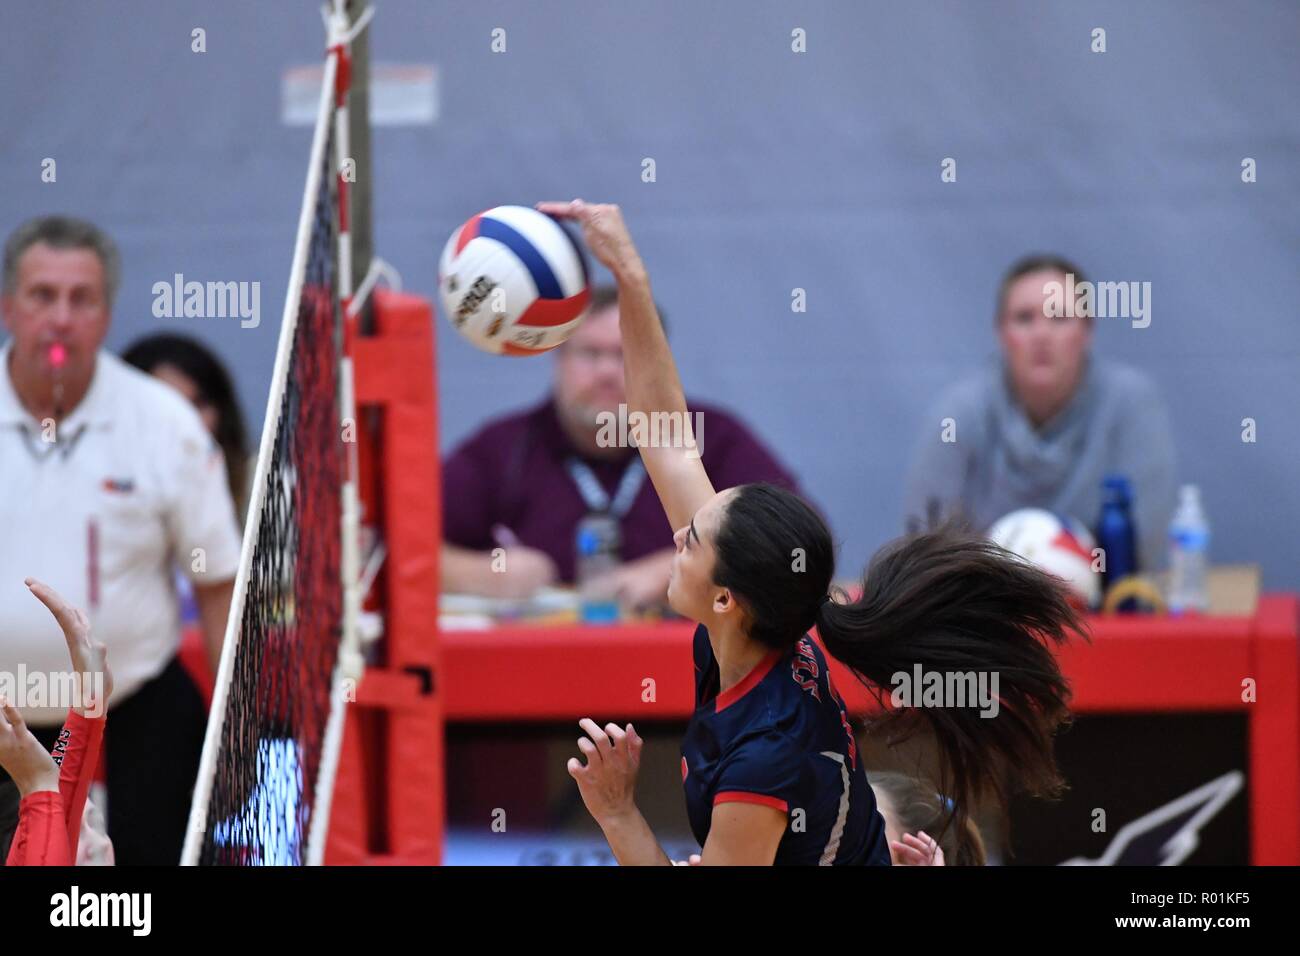 Player finessing a lop kill shot over the net. USA Stock Photo